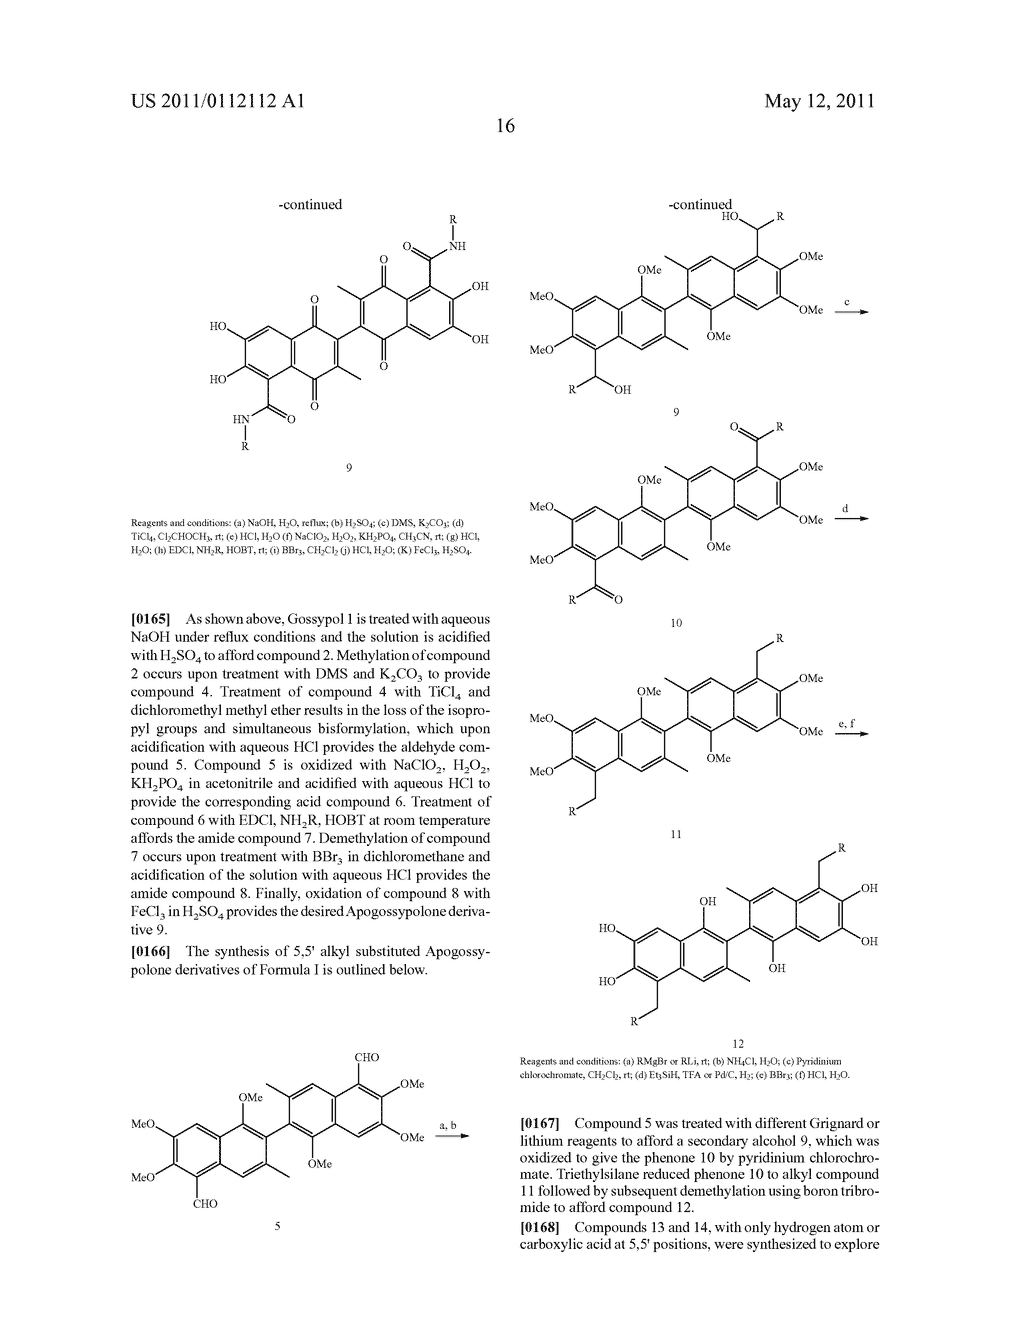 APOGOSSYPOLONE DERIVATIVES AS ANTICANCER AGENTS - diagram, schematic, and image 42